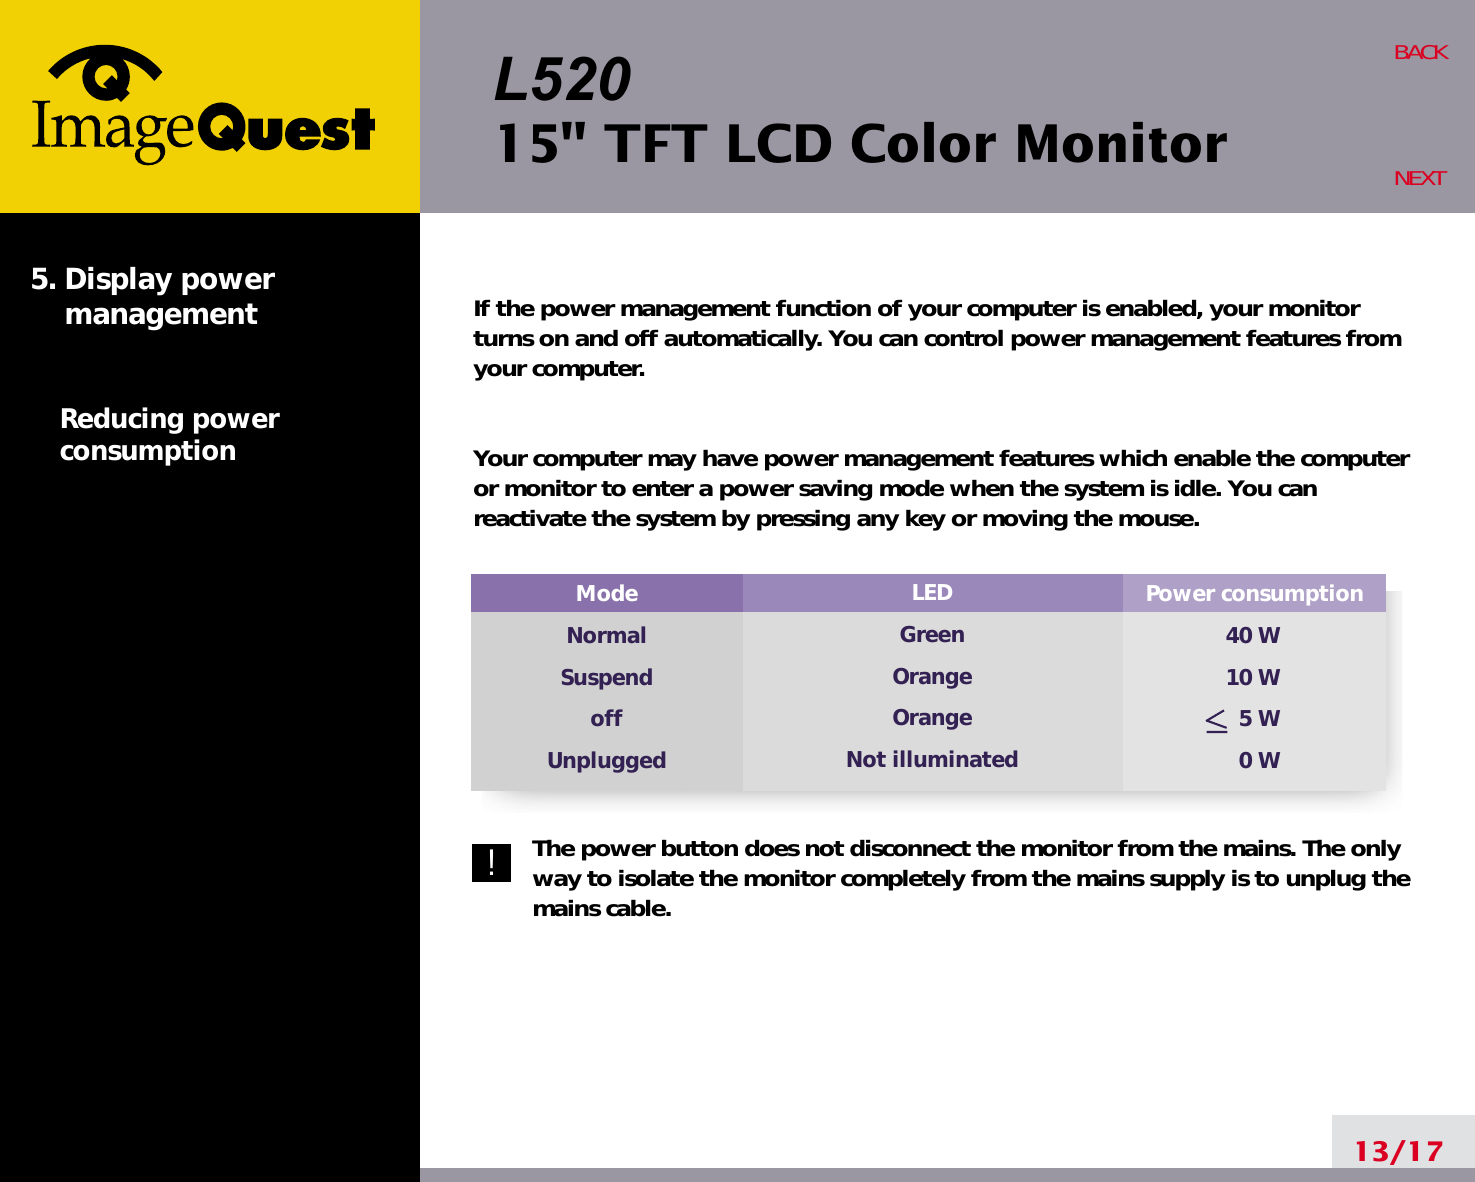 L52015&quot; TFT LCD Color MonitorPower consumption40 W10 W5 W0 WModeNormalSuspendoffUnpluggedLEDGreenOrangeOrangeNot illuminatedIf the power management function of your computer is enabled, your monitorturns on and off automatically. You can control power management features fromyour computer.Your computer may have power management features which enable the computeror monitor to enter a power saving mode when the system is idle. You canreactivate the system by pressing any key or moving the mouse.The power button does not disconnect the monitor from the mains. The onlyway to isolate the monitor completely from the mains supply is to unplug themains cable.13/17BACKNEXT5. Display power managementReducing powerconsumption!